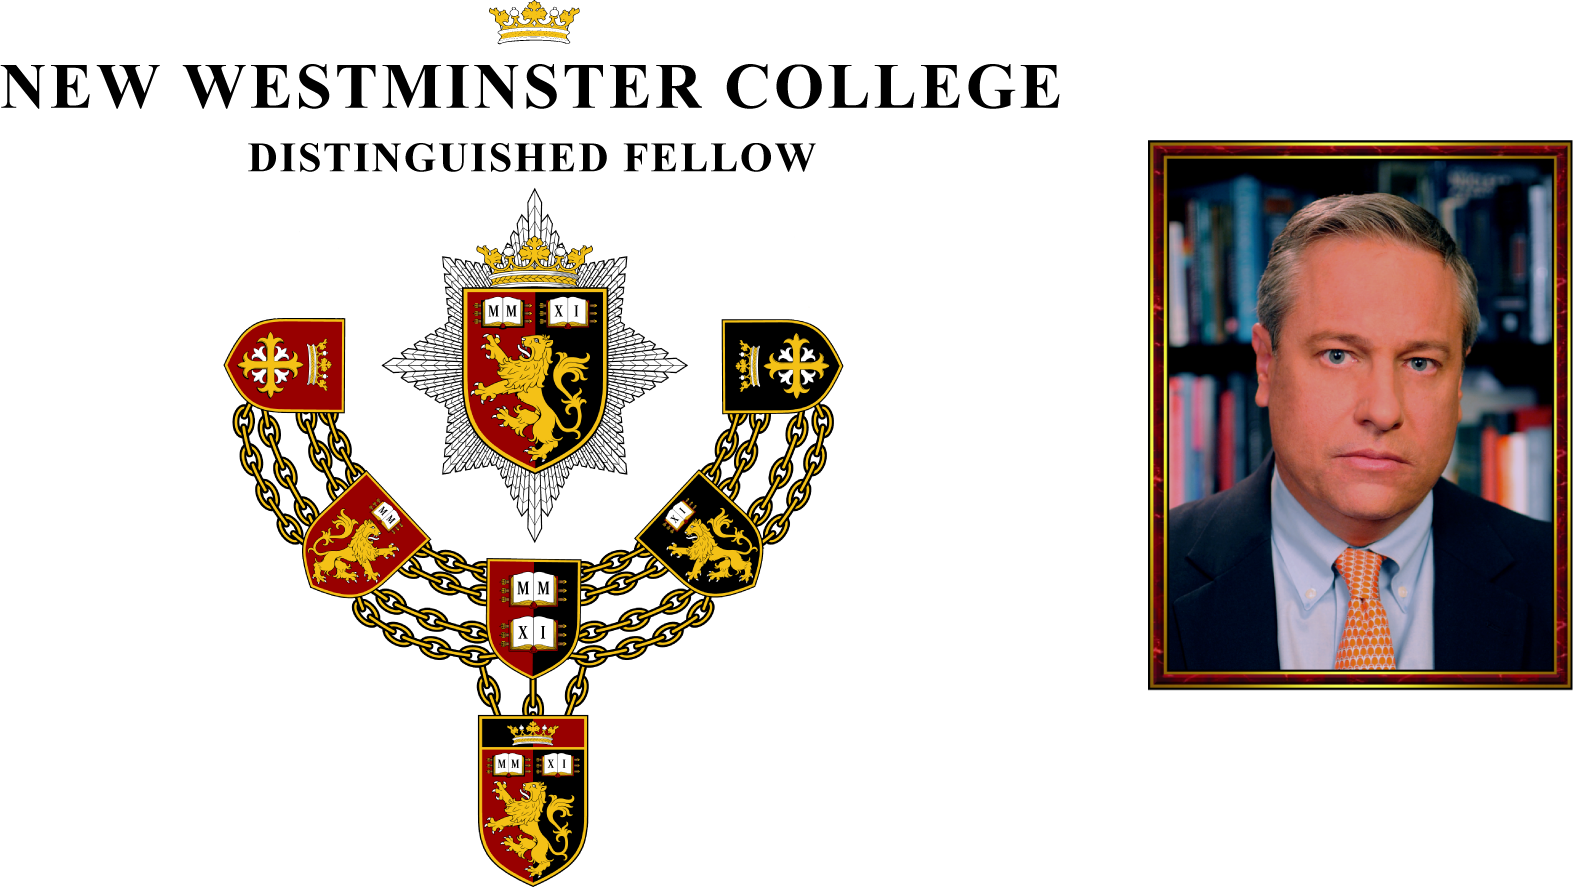 File:NWC-Insignia-Distinguished-Fellow-Professor-Dr.-C.-Michael-Gibson-M.S.-M.D.-26-NOV-2012.png